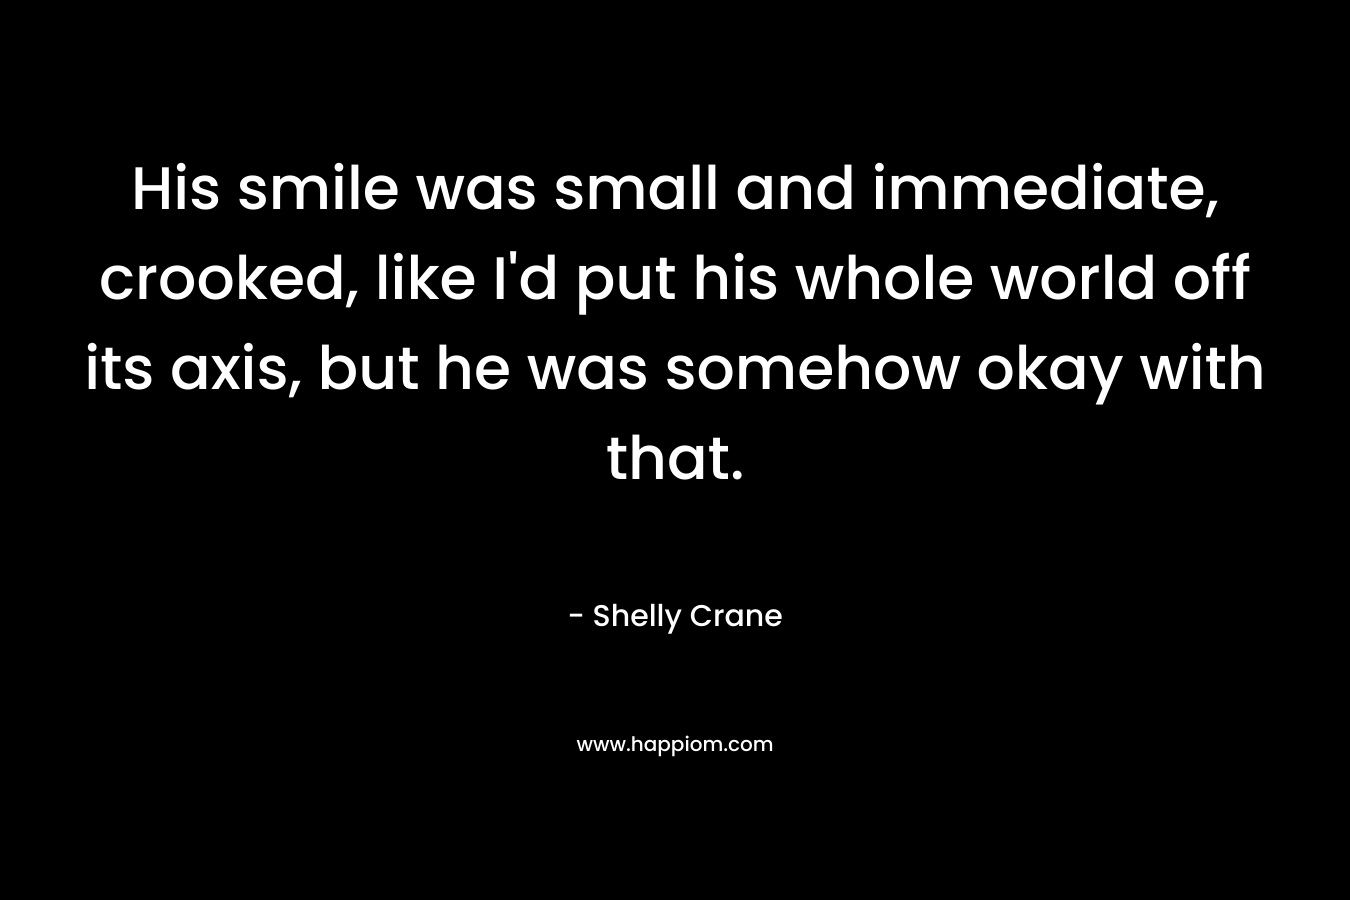 His smile was small and immediate, crooked, like I’d put his whole world off its axis, but he was somehow okay with that. – Shelly Crane